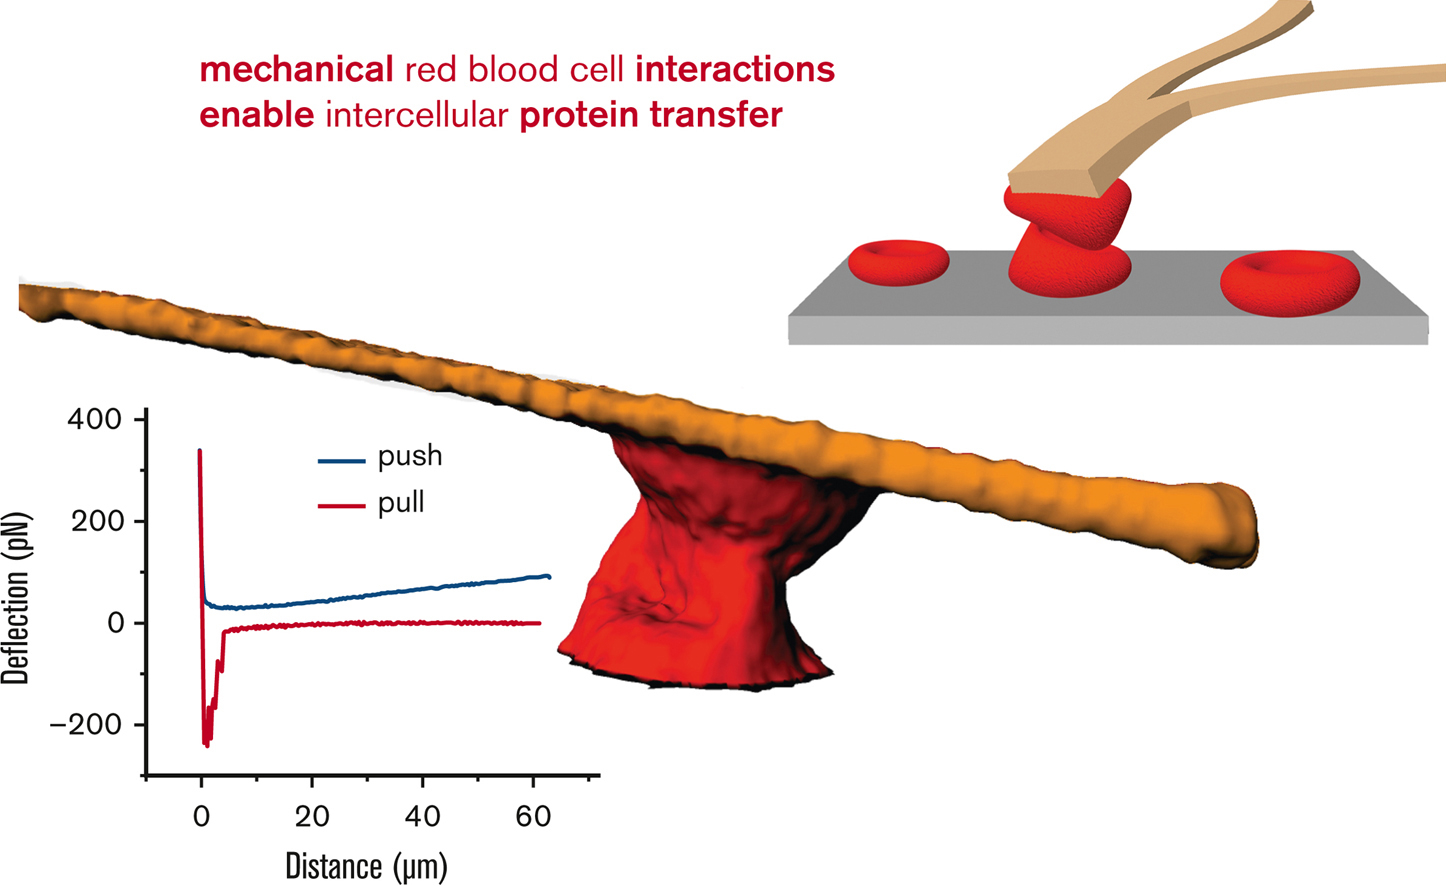 Mechanical red blood cell interactions enable intercellular protein transfer.